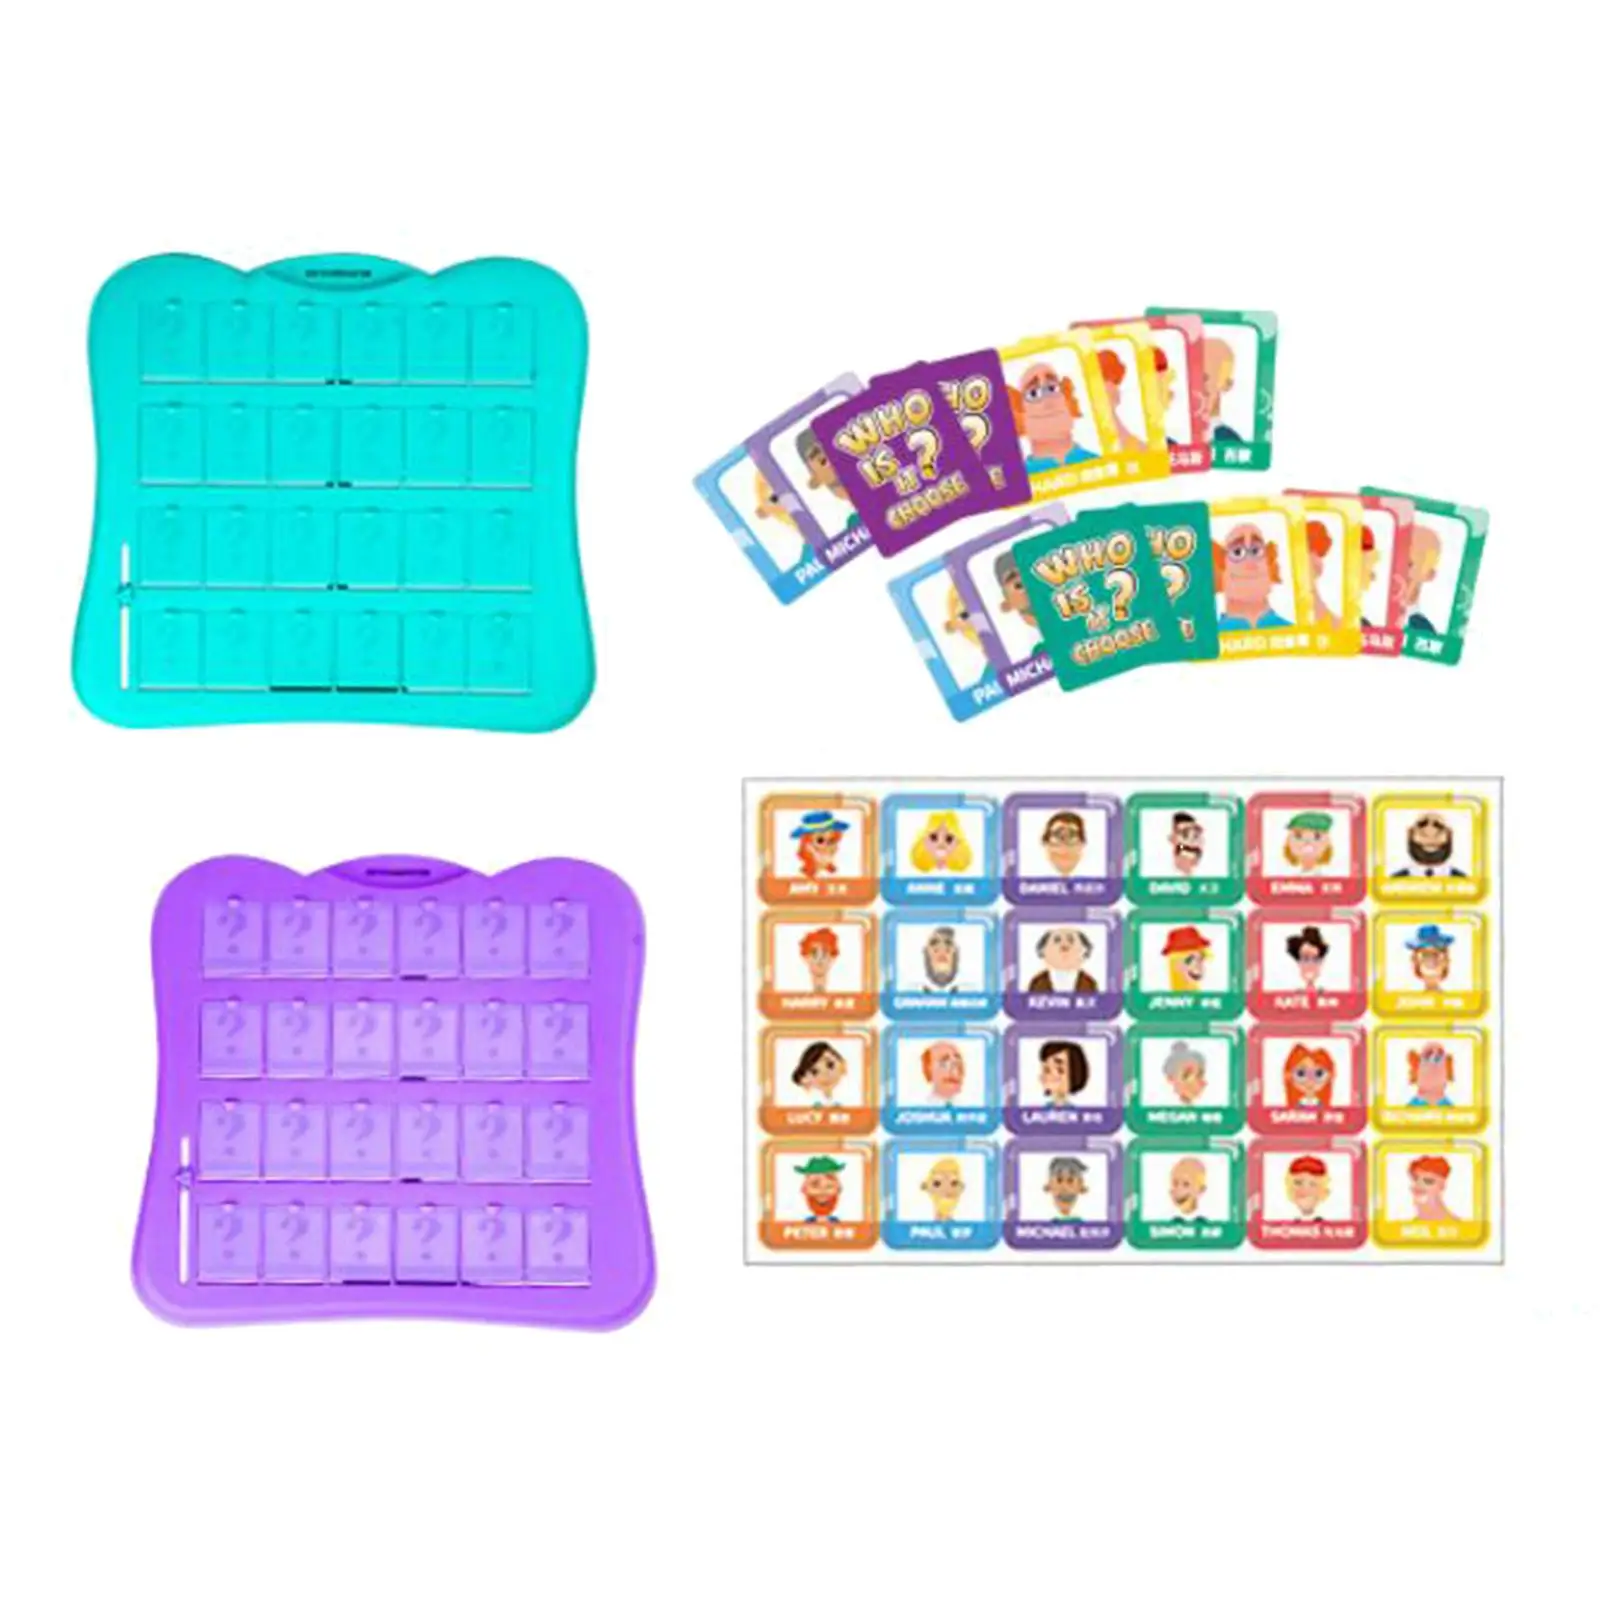 Guessing Who Game Logical Reasoning Abilities Family Board Game Reasoning Game for Party Prop Children Gifts Family Game Boys